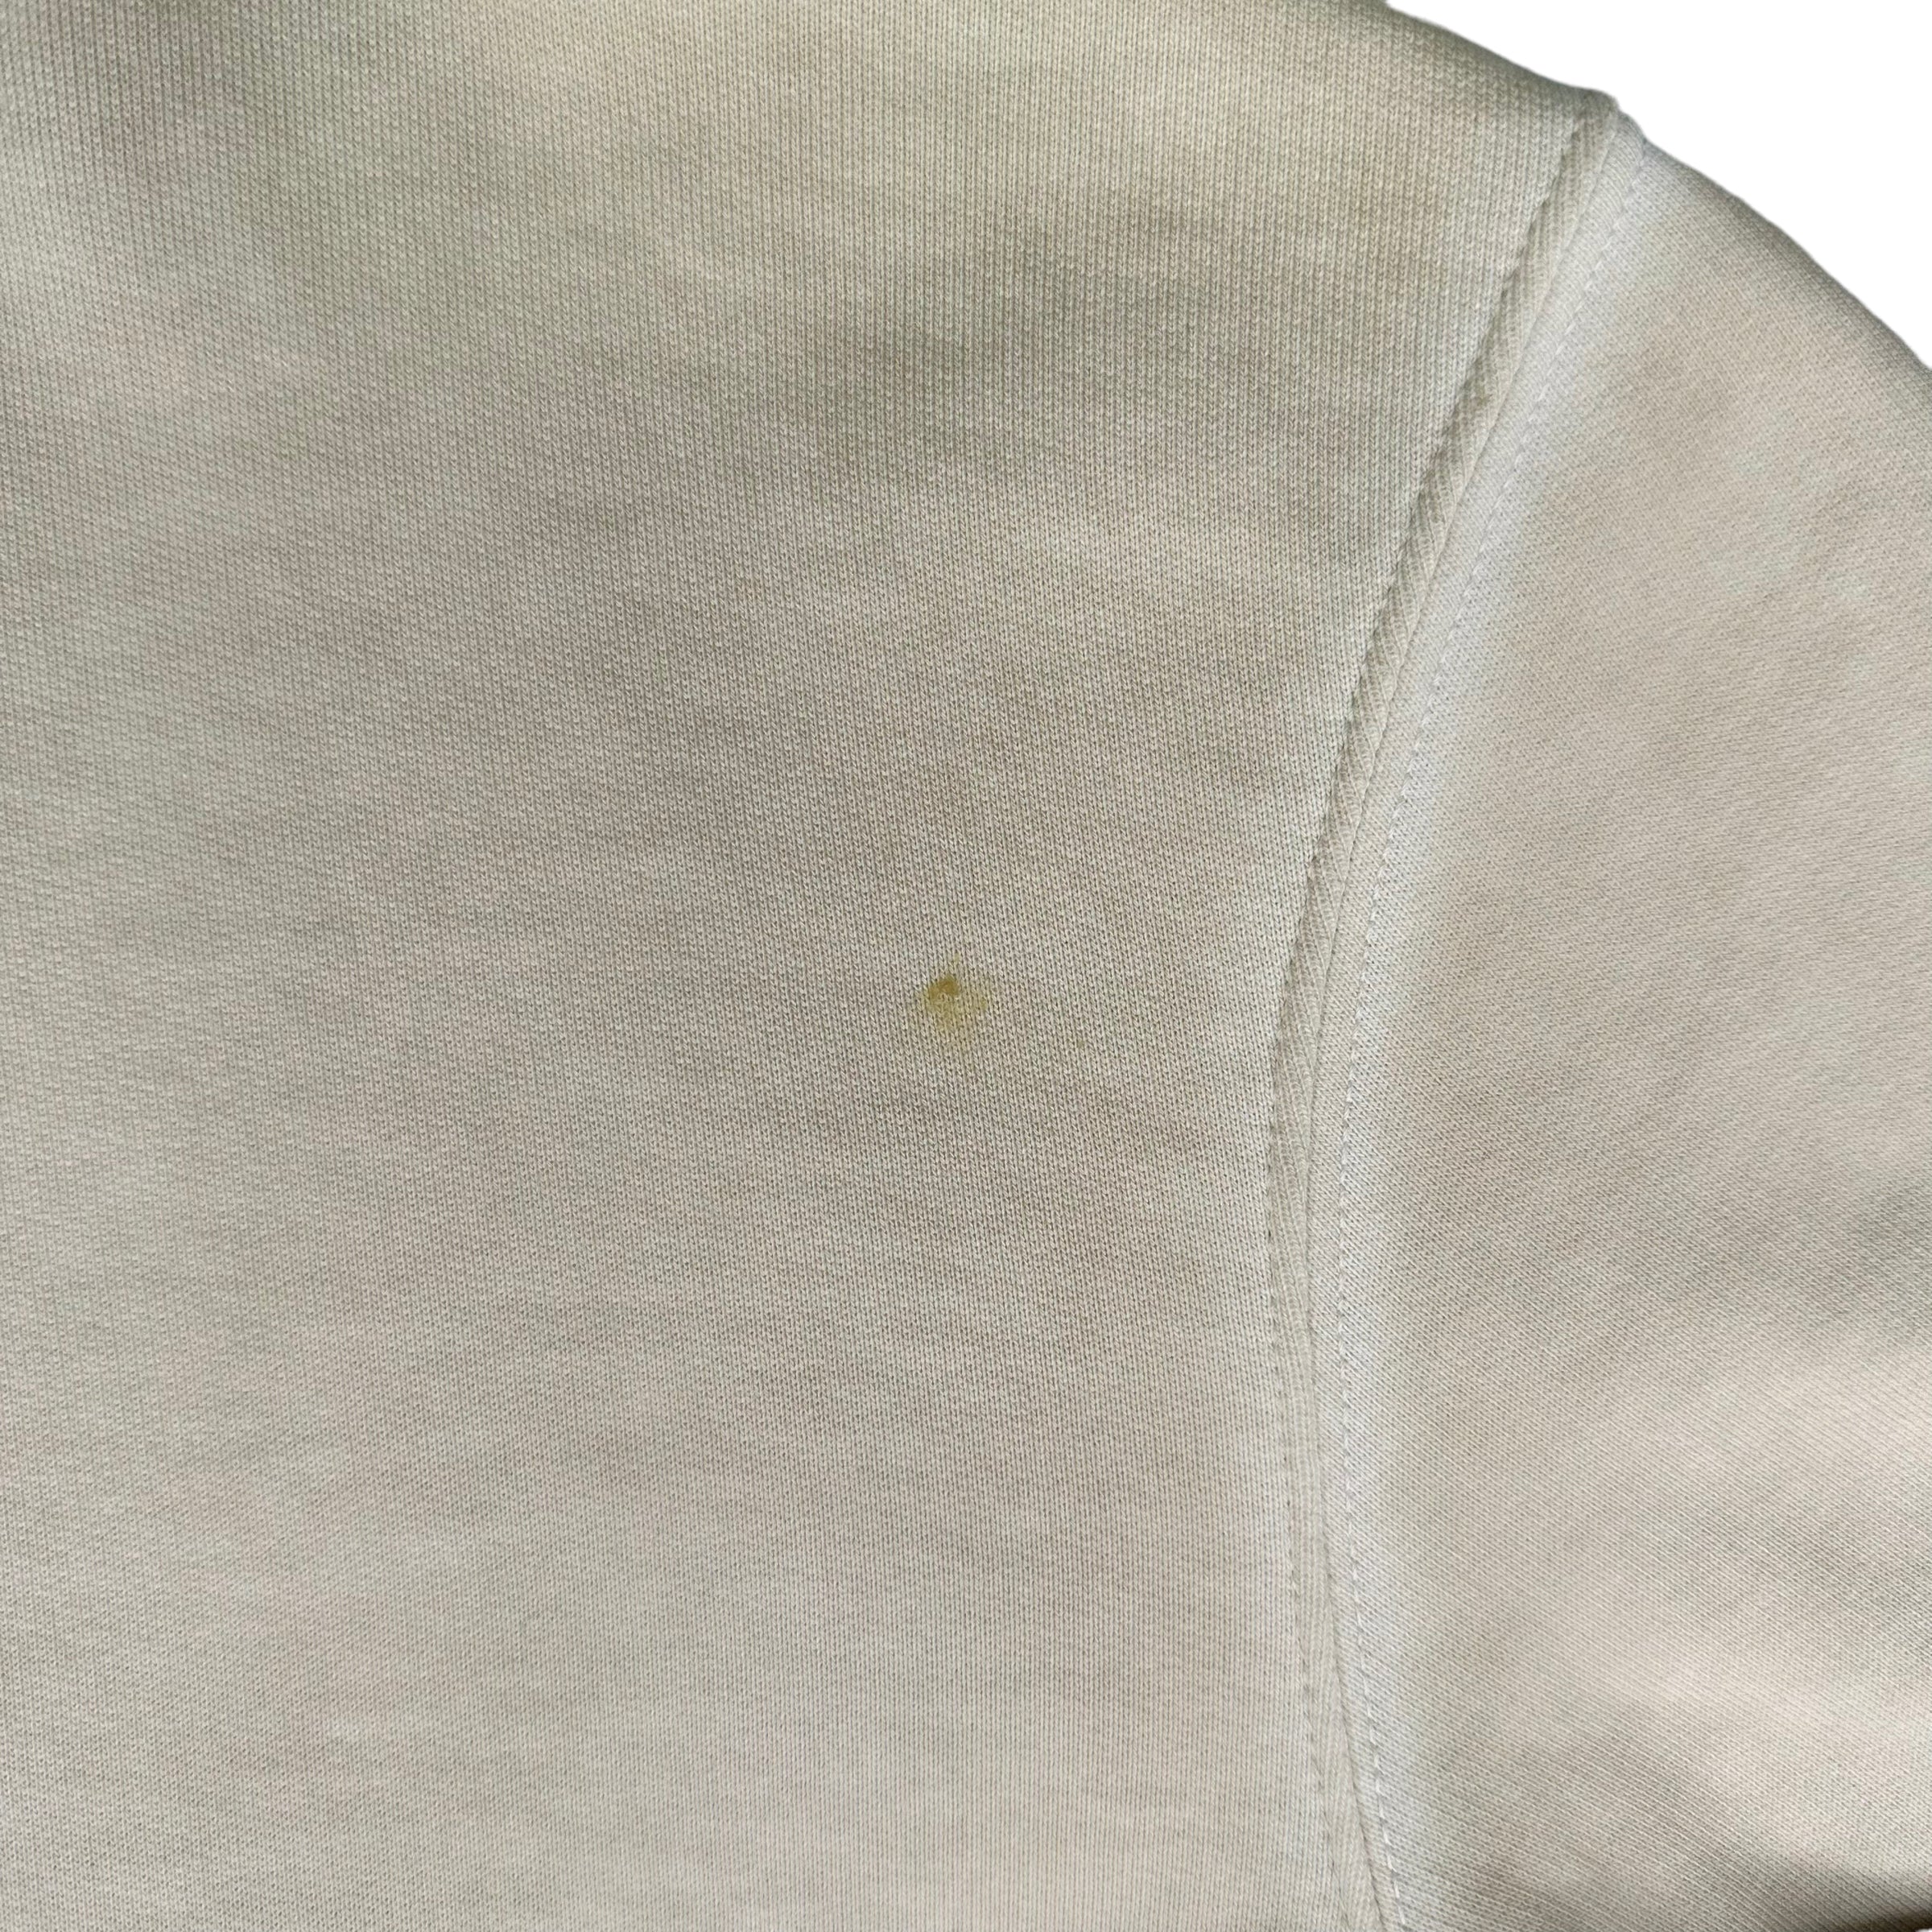 A COLD WALL PULLOVER HOODIE - BEIGE